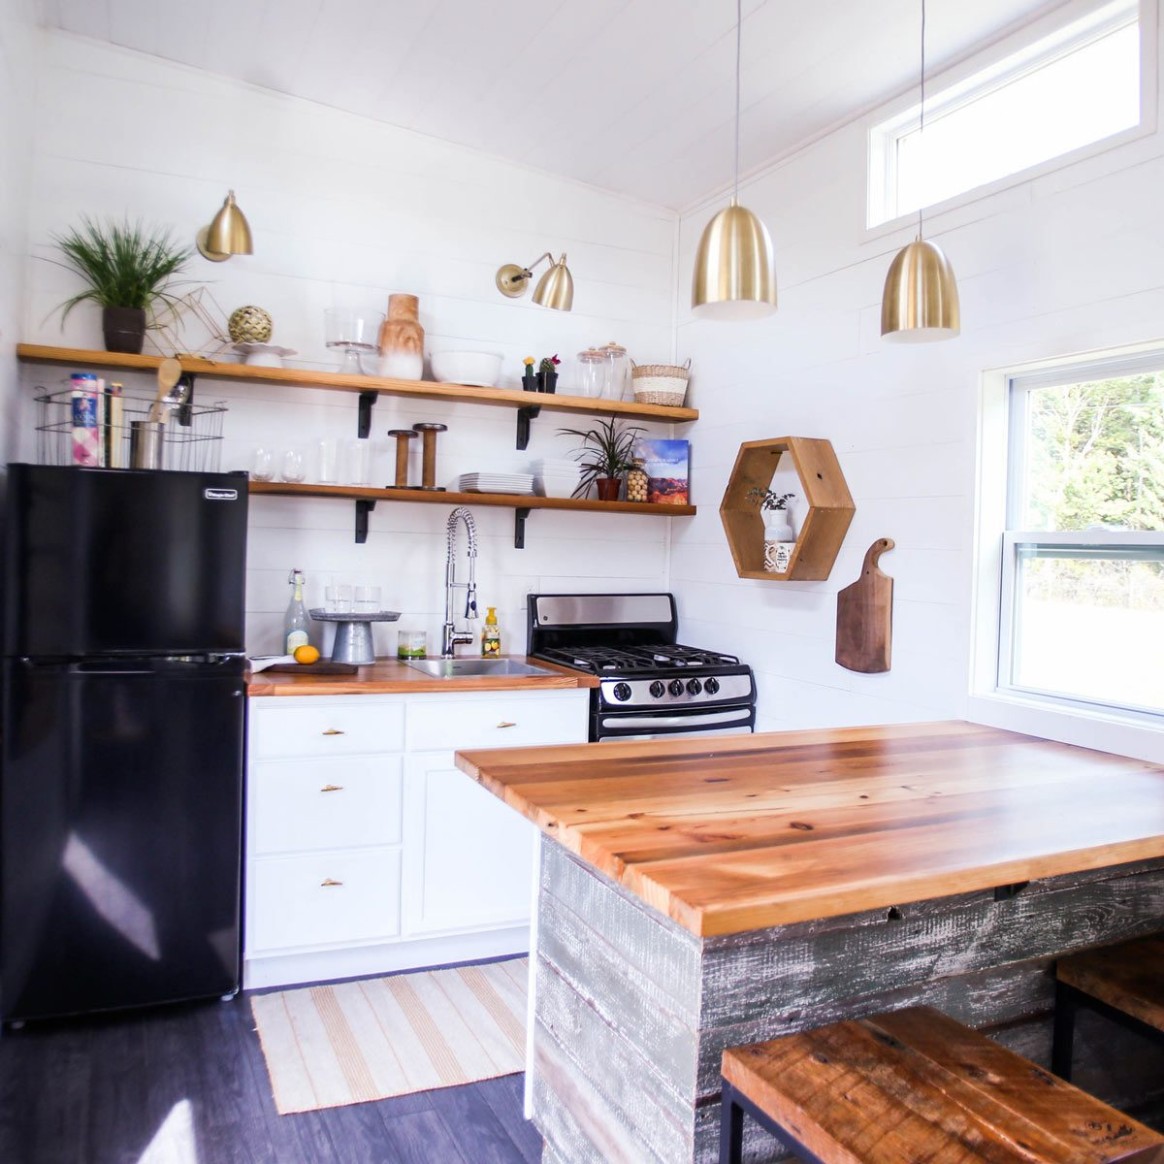 5 Incredible Tiny Home Kitchens — The Family Handyman - kitchens for small homes